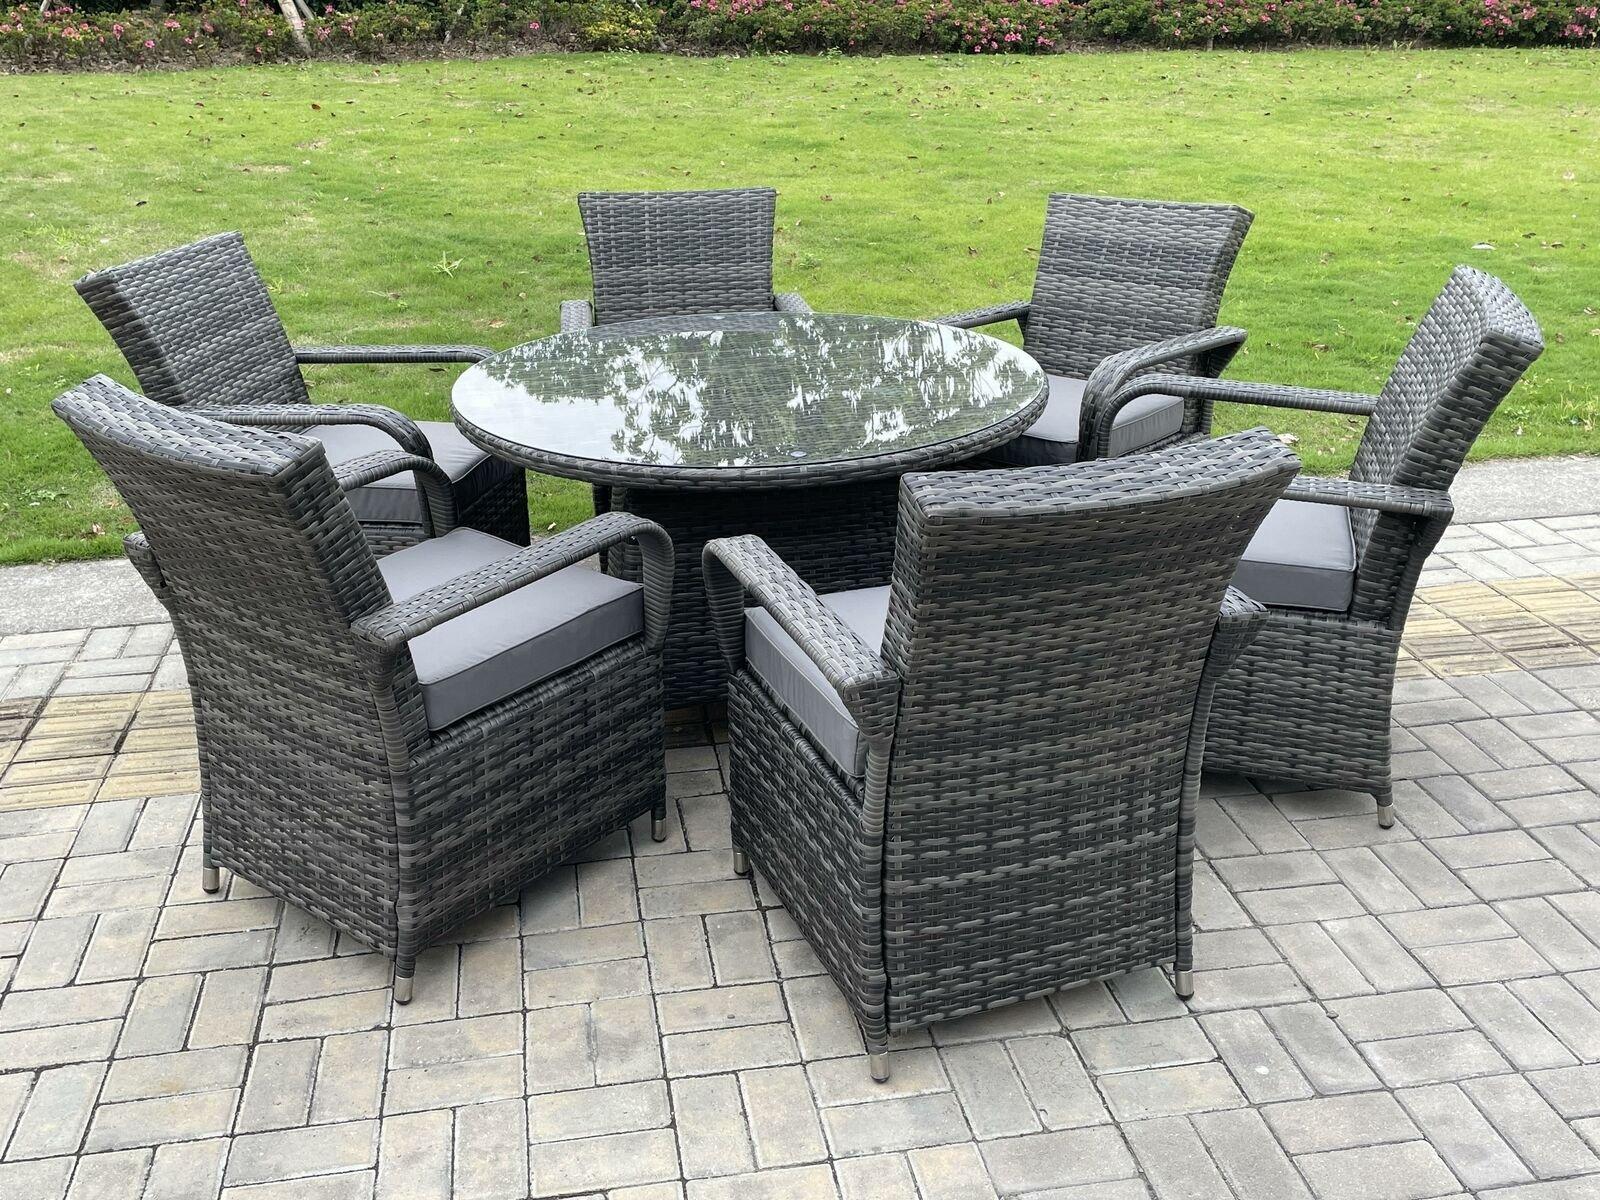 Outdoor Rattan Garden Furniture Dining Set Table And Chair Set Wicker Patio 6 Chairs Plus Round Tabl